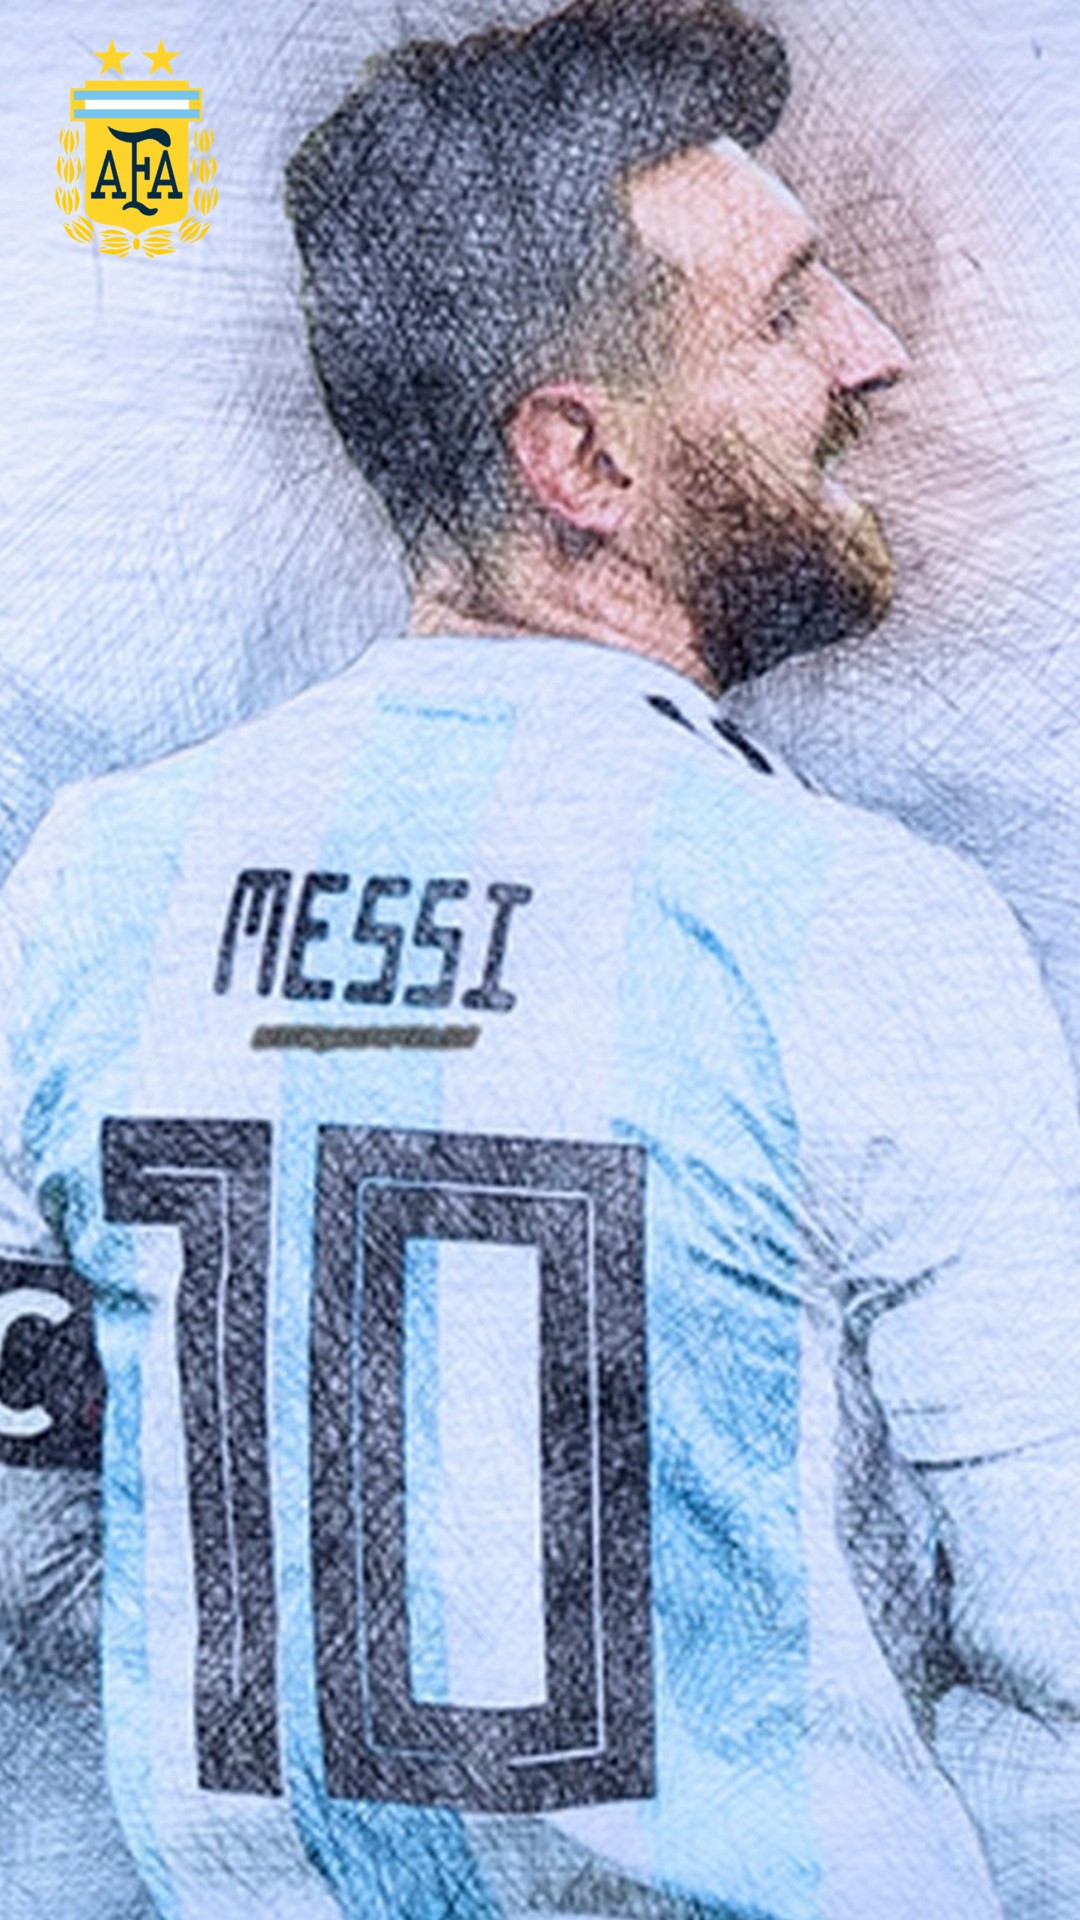 iPhone X Wallpaper Messi Argentina with image resolution 1080x1920 pixel. You can make this wallpaper for your iPhone 5, 6, 7, 8, X backgrounds, Mobile Screensaver, or iPad Lock Screen